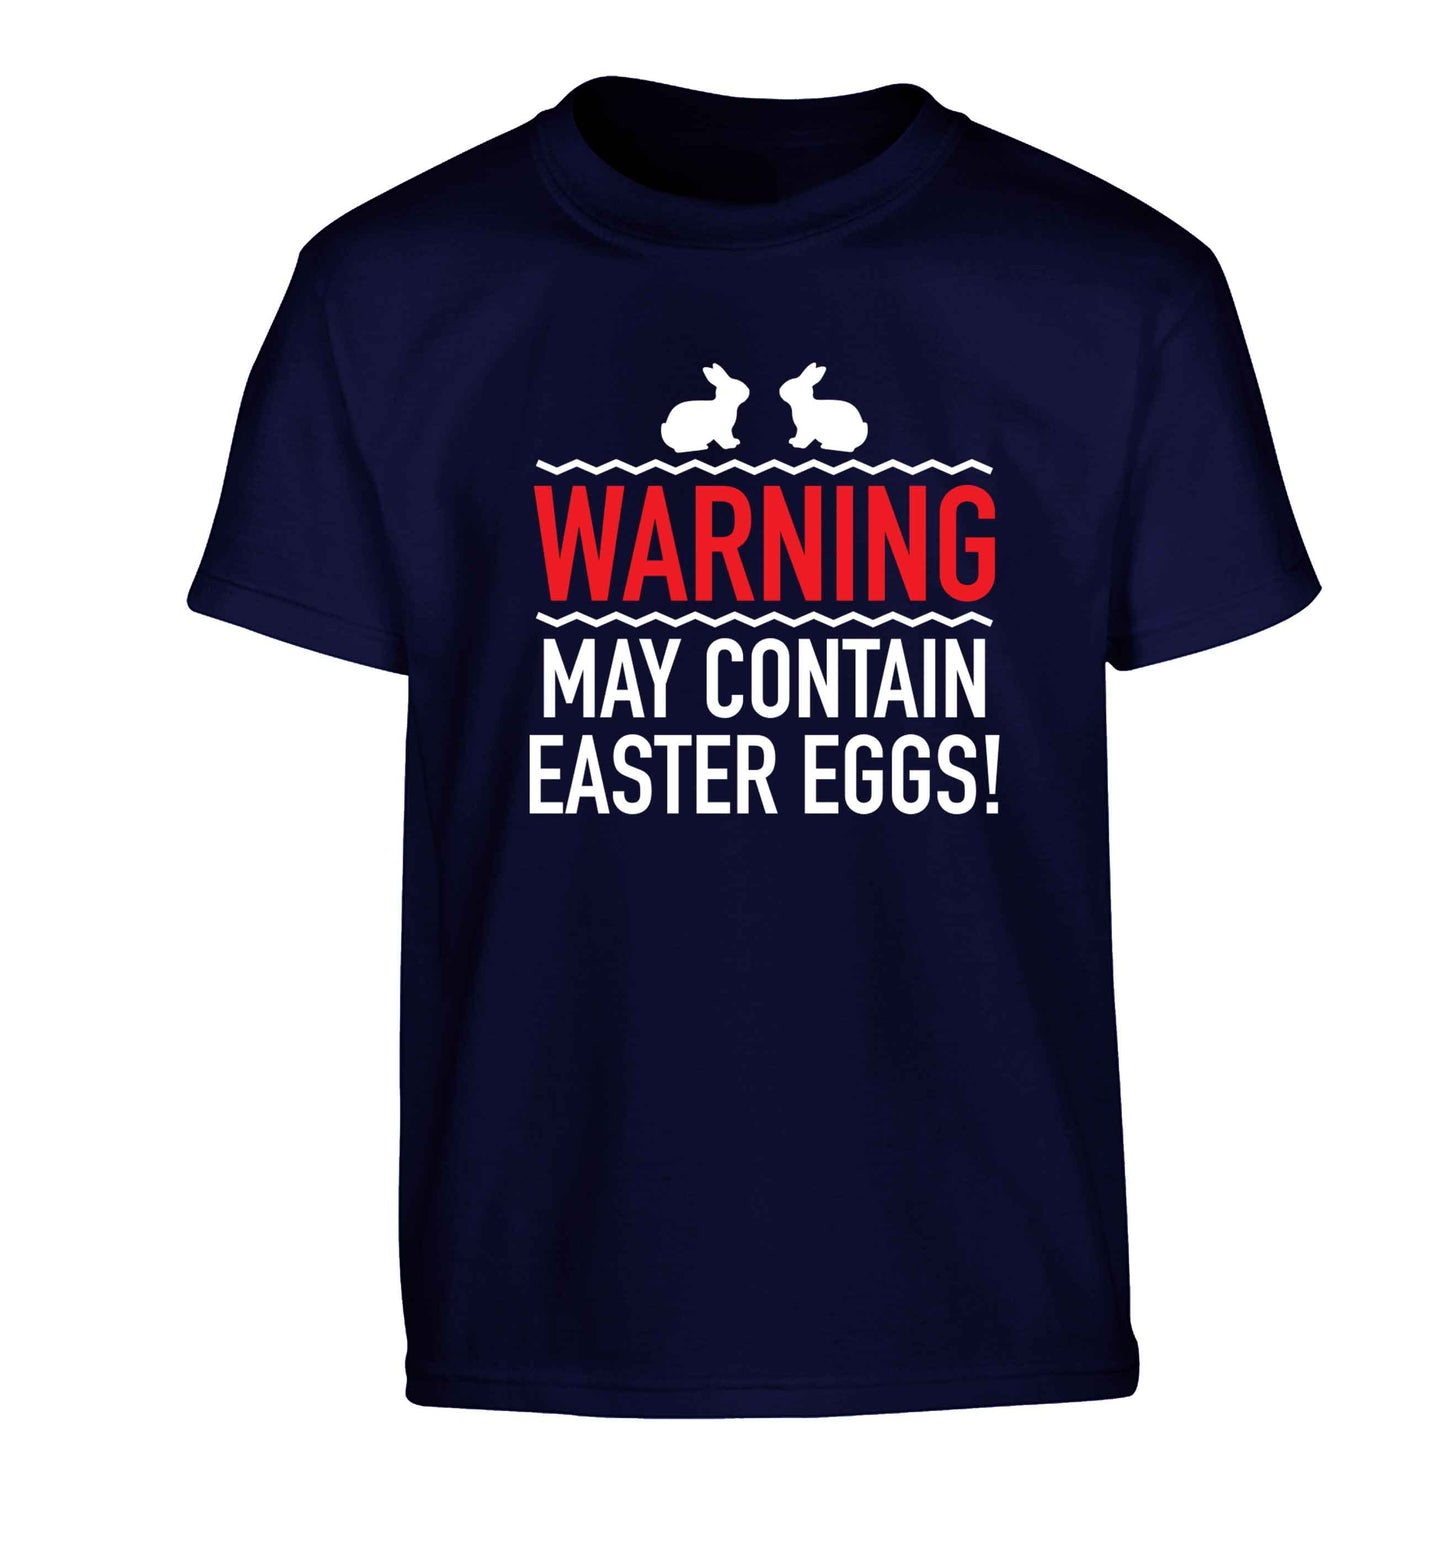 Warning may contain Easter eggs Children's navy Tshirt 12-13 Years